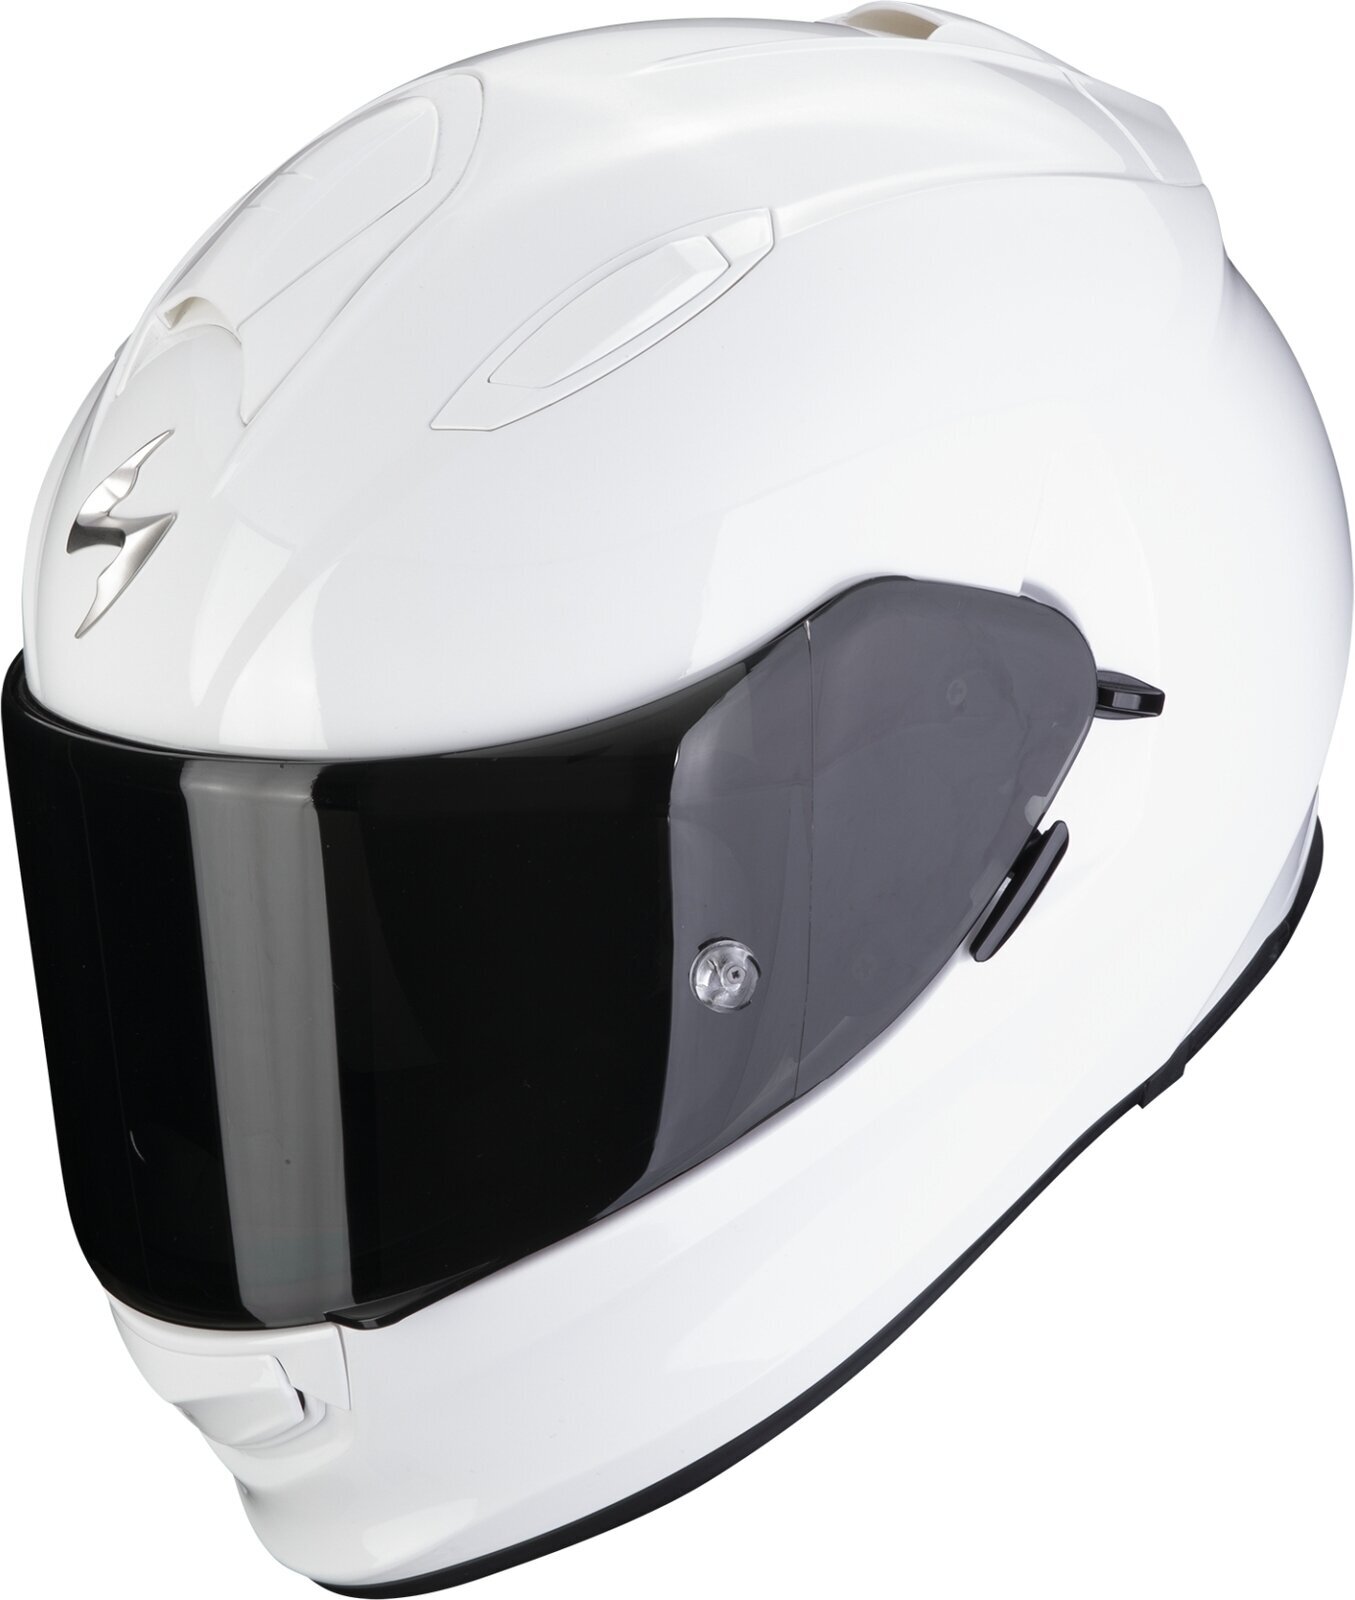 Helm Scorpion EXO 491 SOLID White L Helm